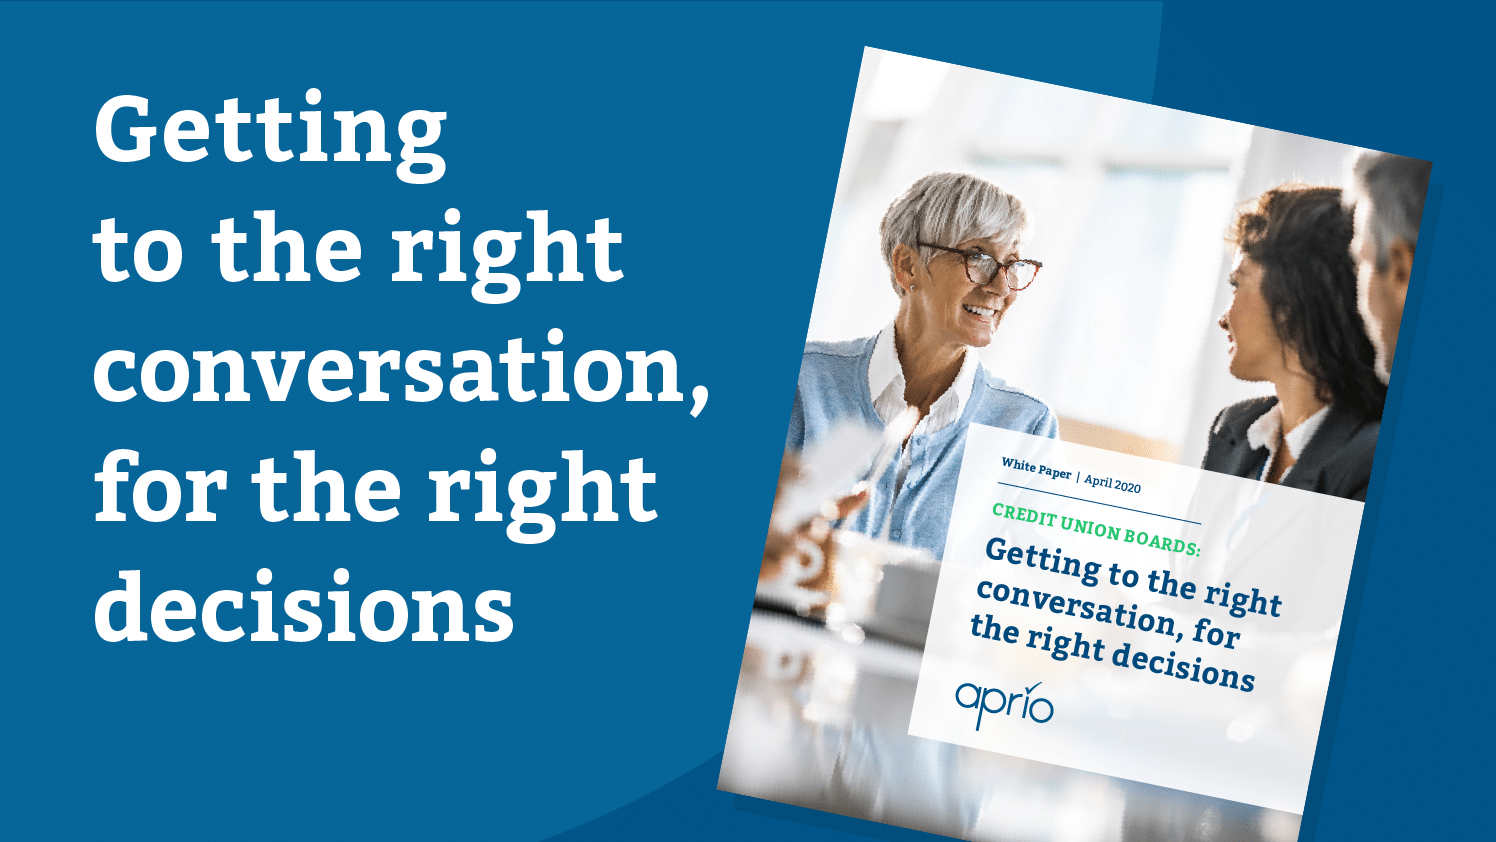 White Paper: Getting to the right conversation, for the right decisions